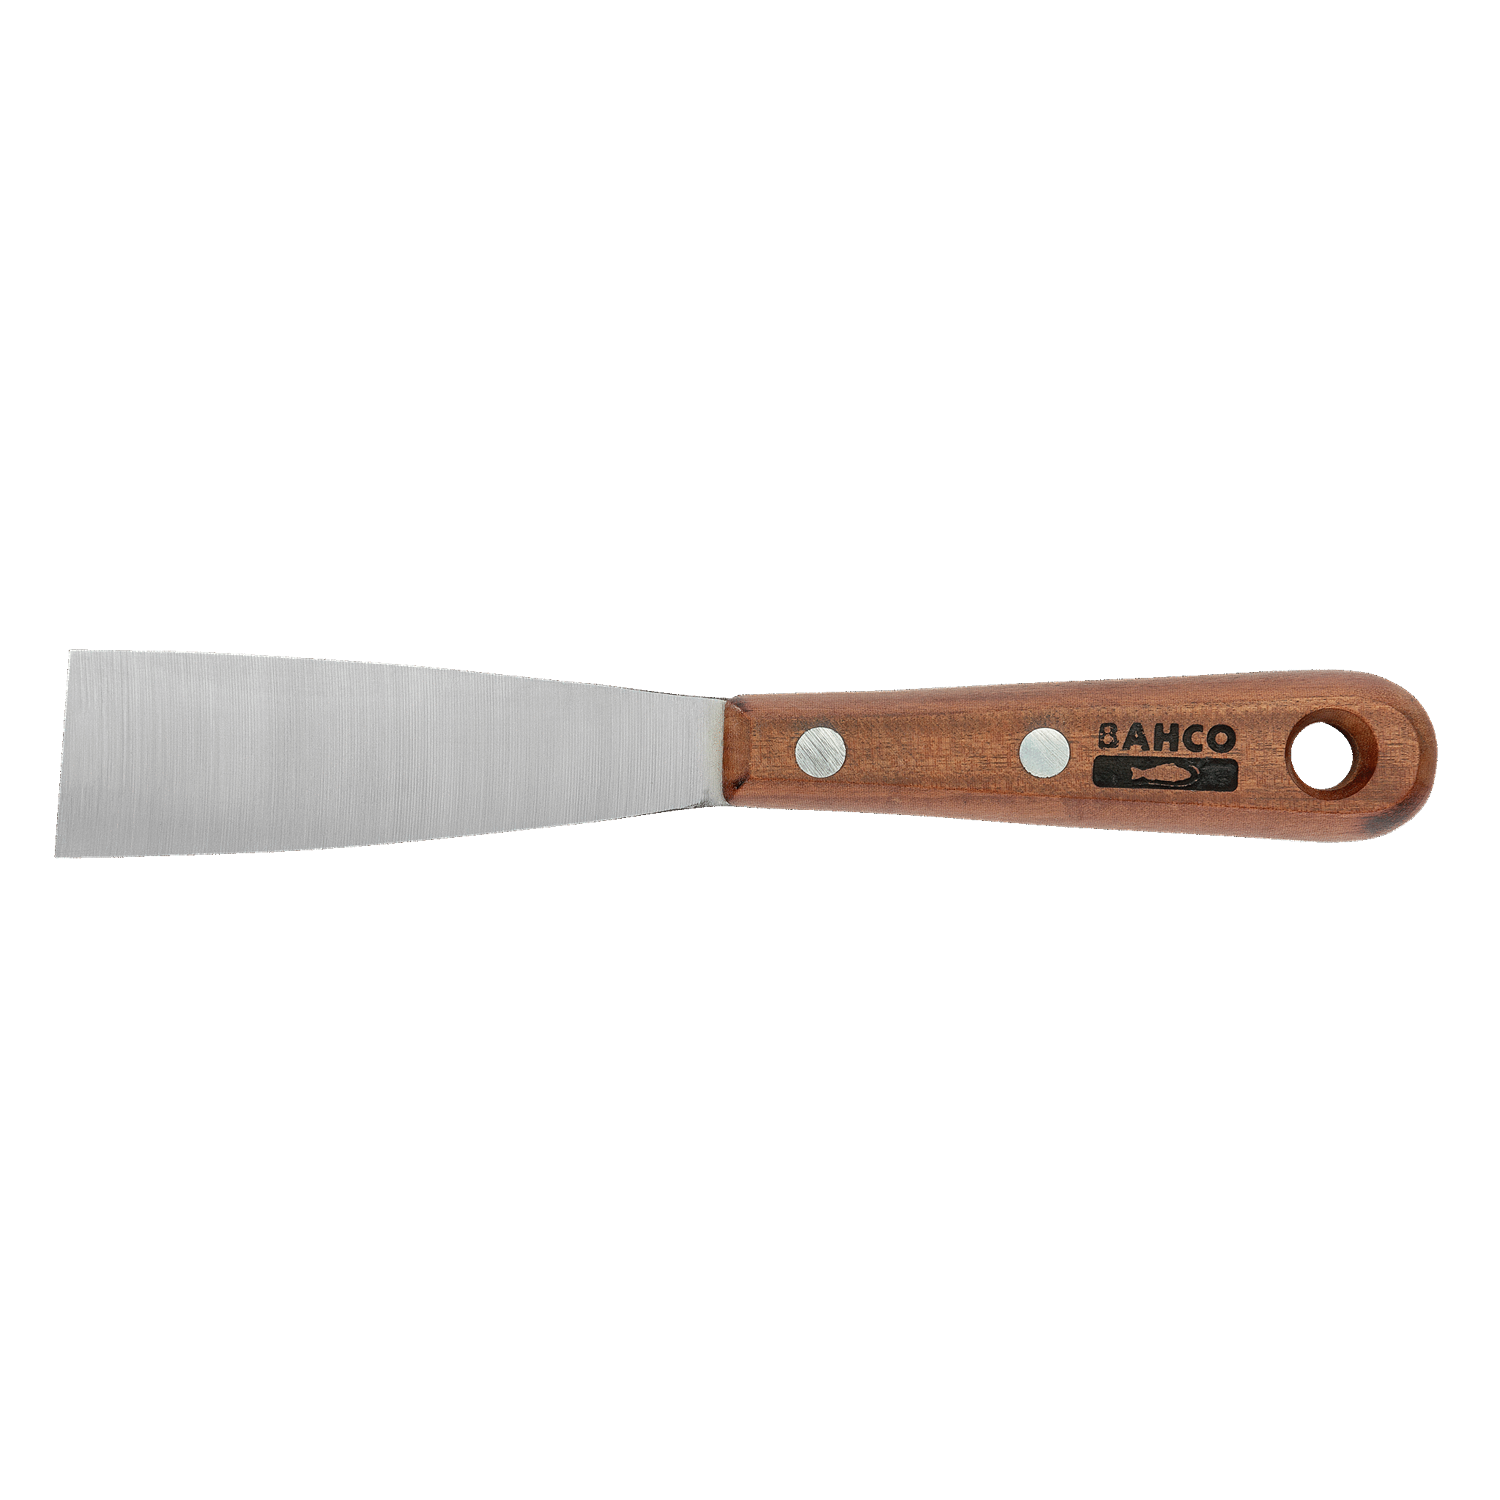 BAHCO 2155 Paint Scraper with Carbon Steel Blade & Wooden Handle - Premium Paint Scraper from BAHCO - Shop now at Yew Aik.